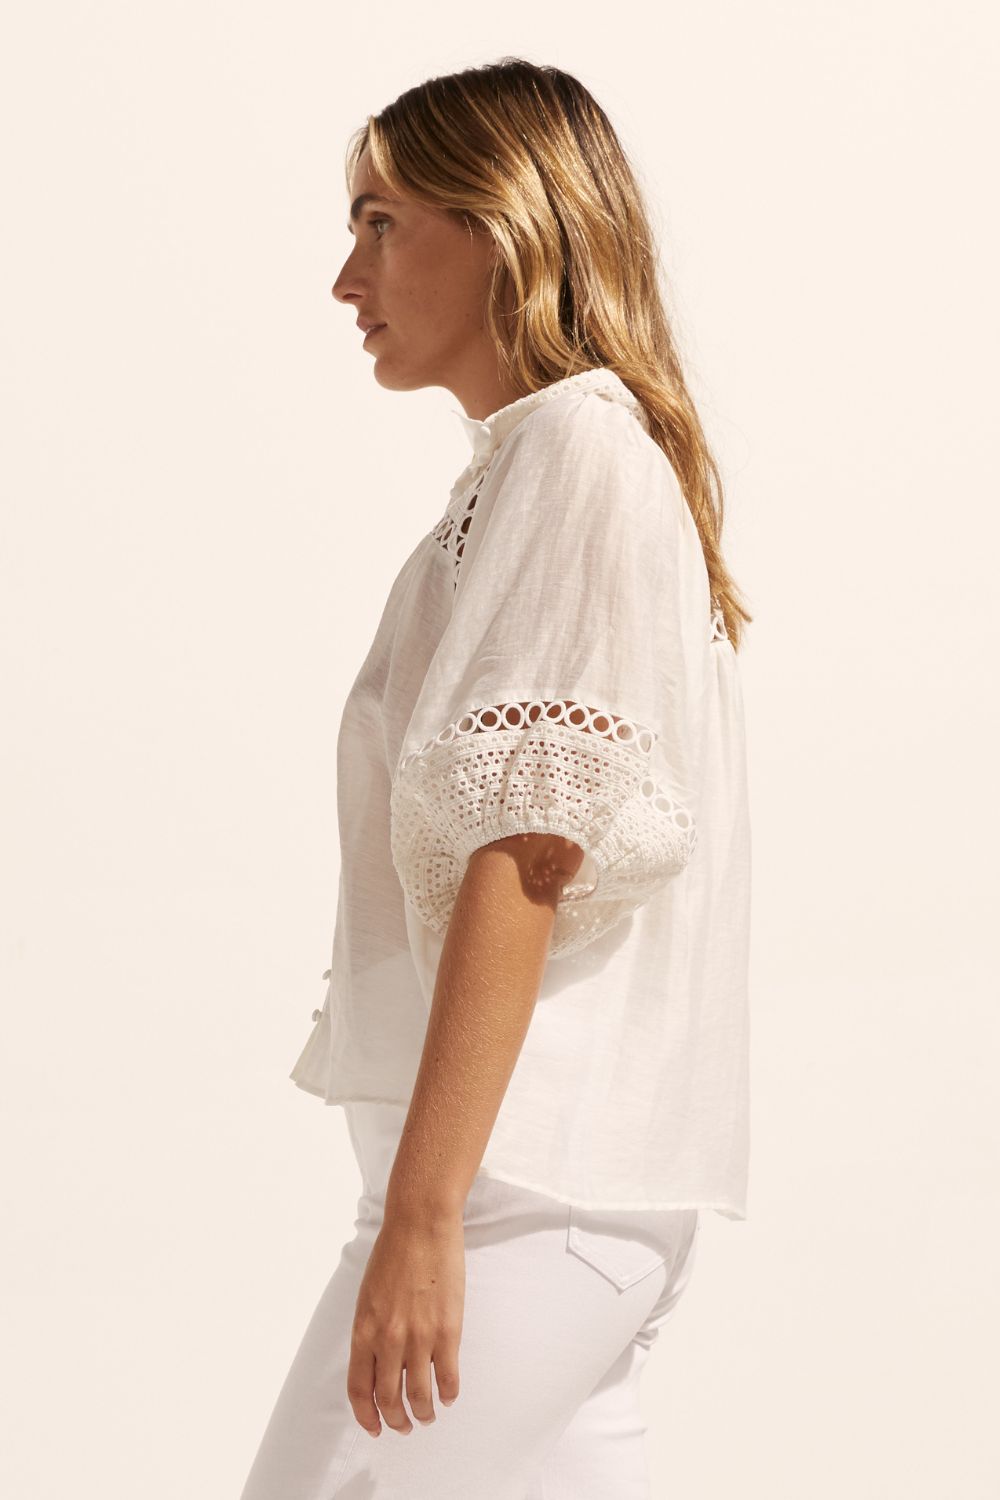 white, top, high neck, mid-length sleeve, covered buttons, circular lace detailing, side image